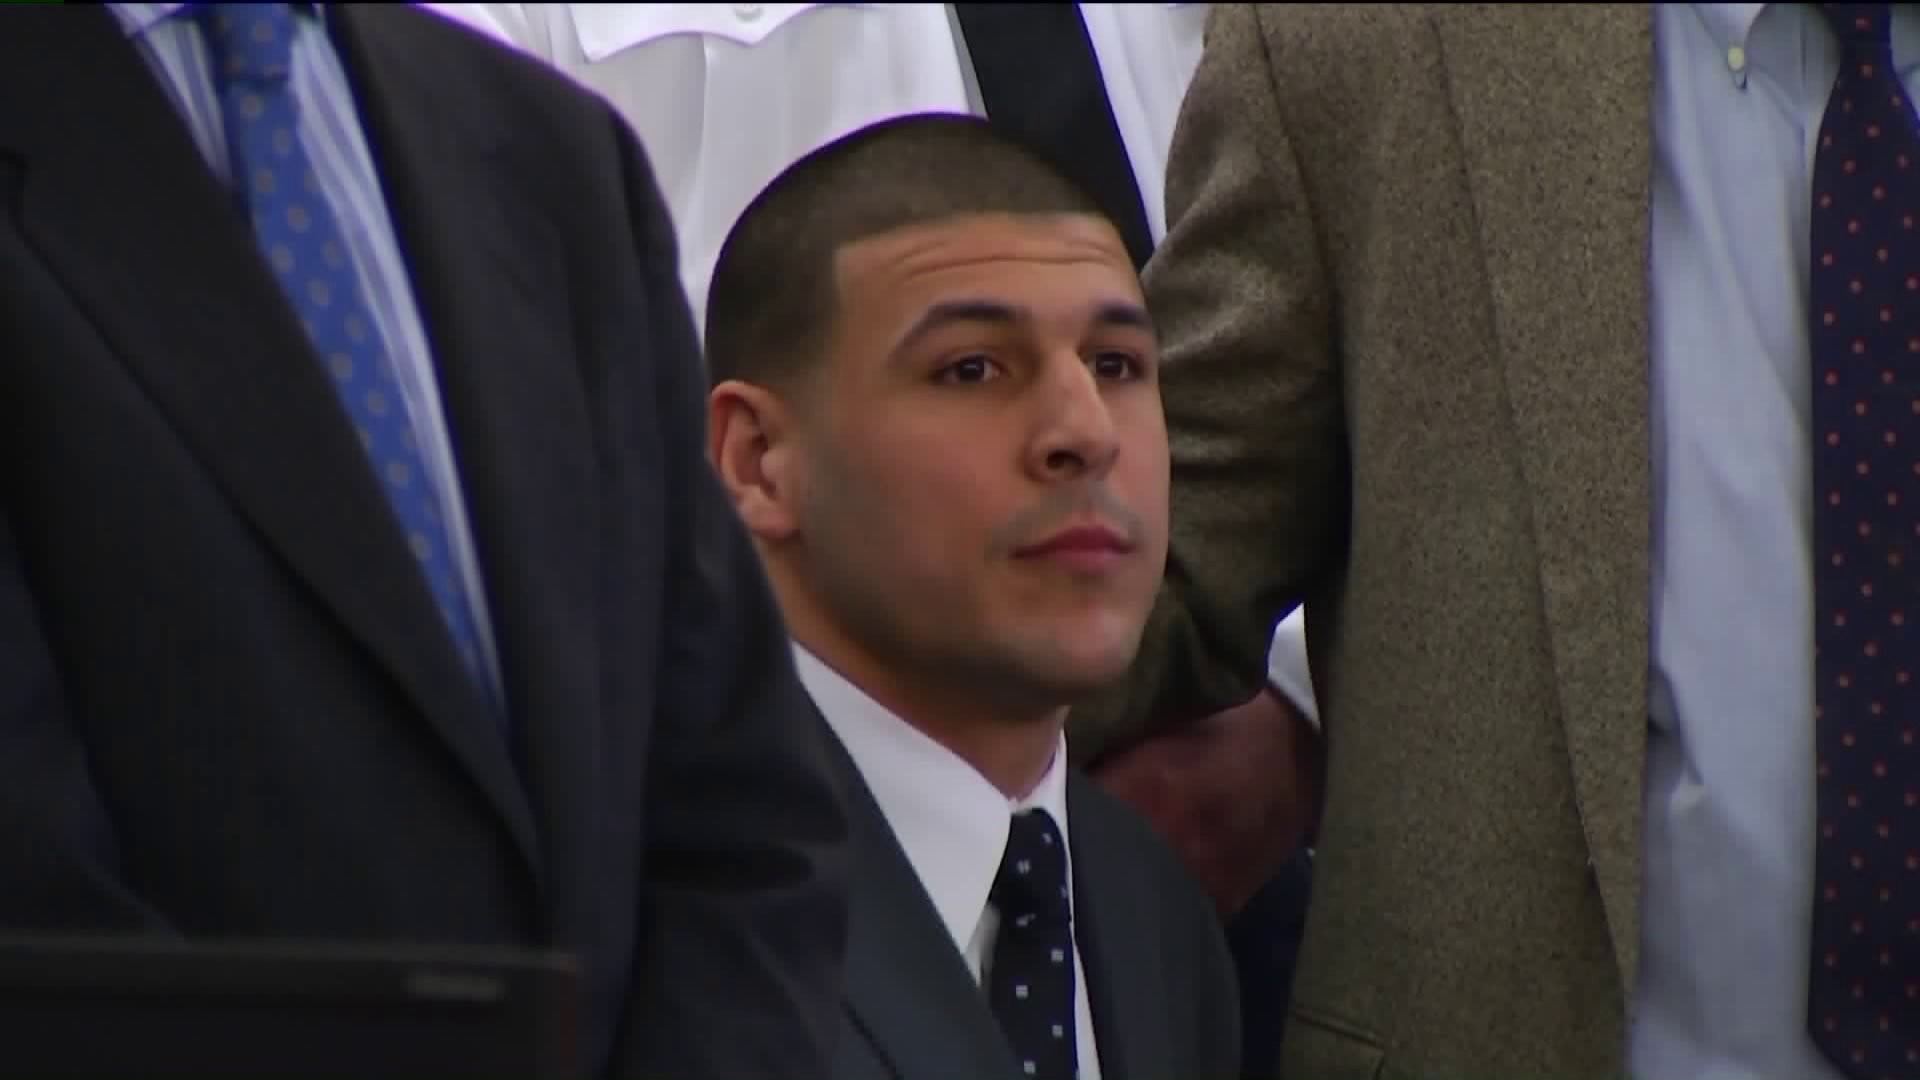 Bristol police expect road to be closed Monday for Hernandez funeral